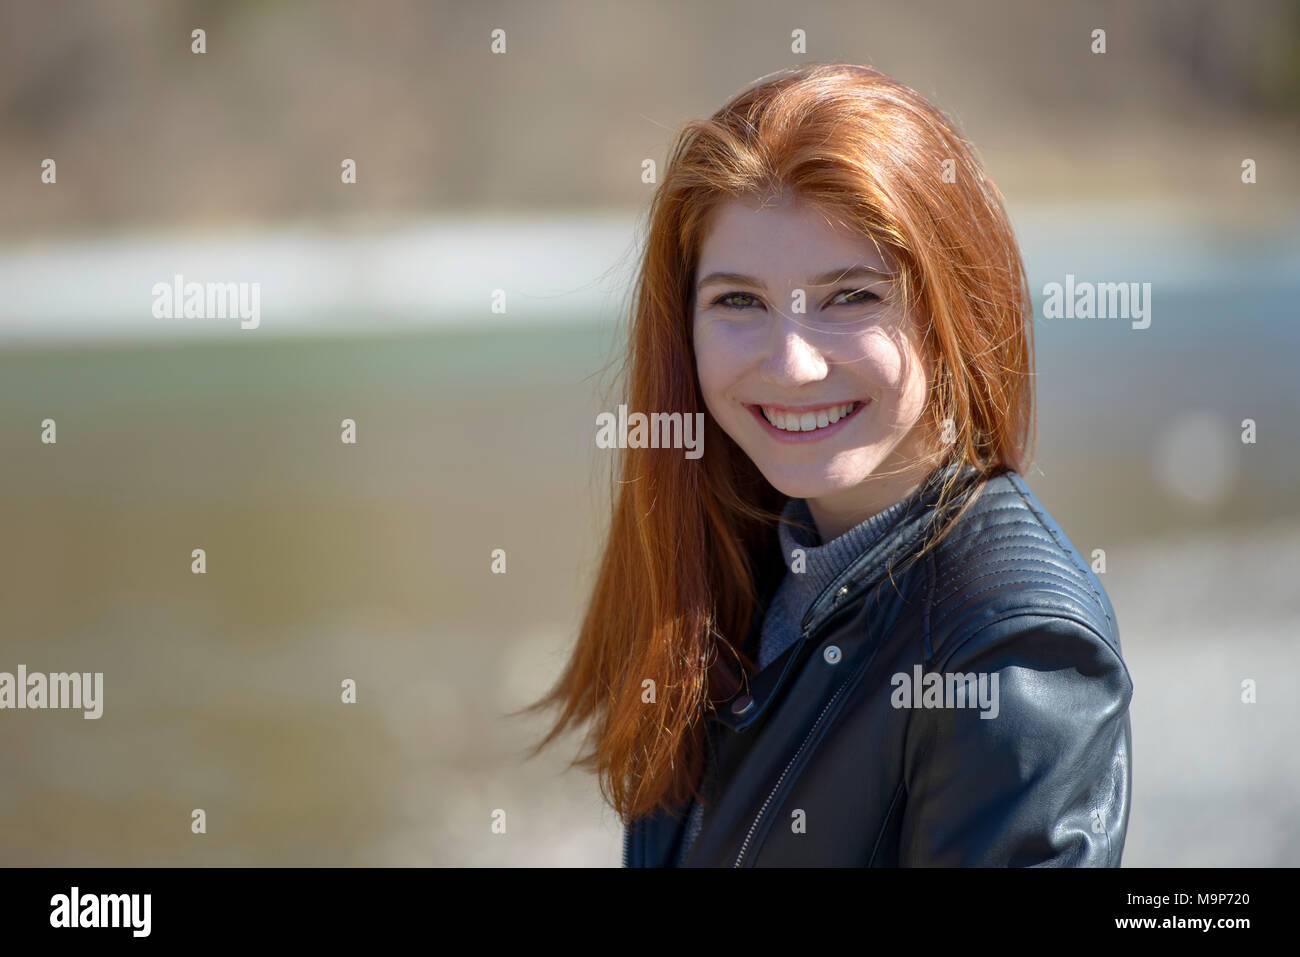 Portrait, young woman, girl, teenager with long red hair, Bavaria, Germany Stock Photo